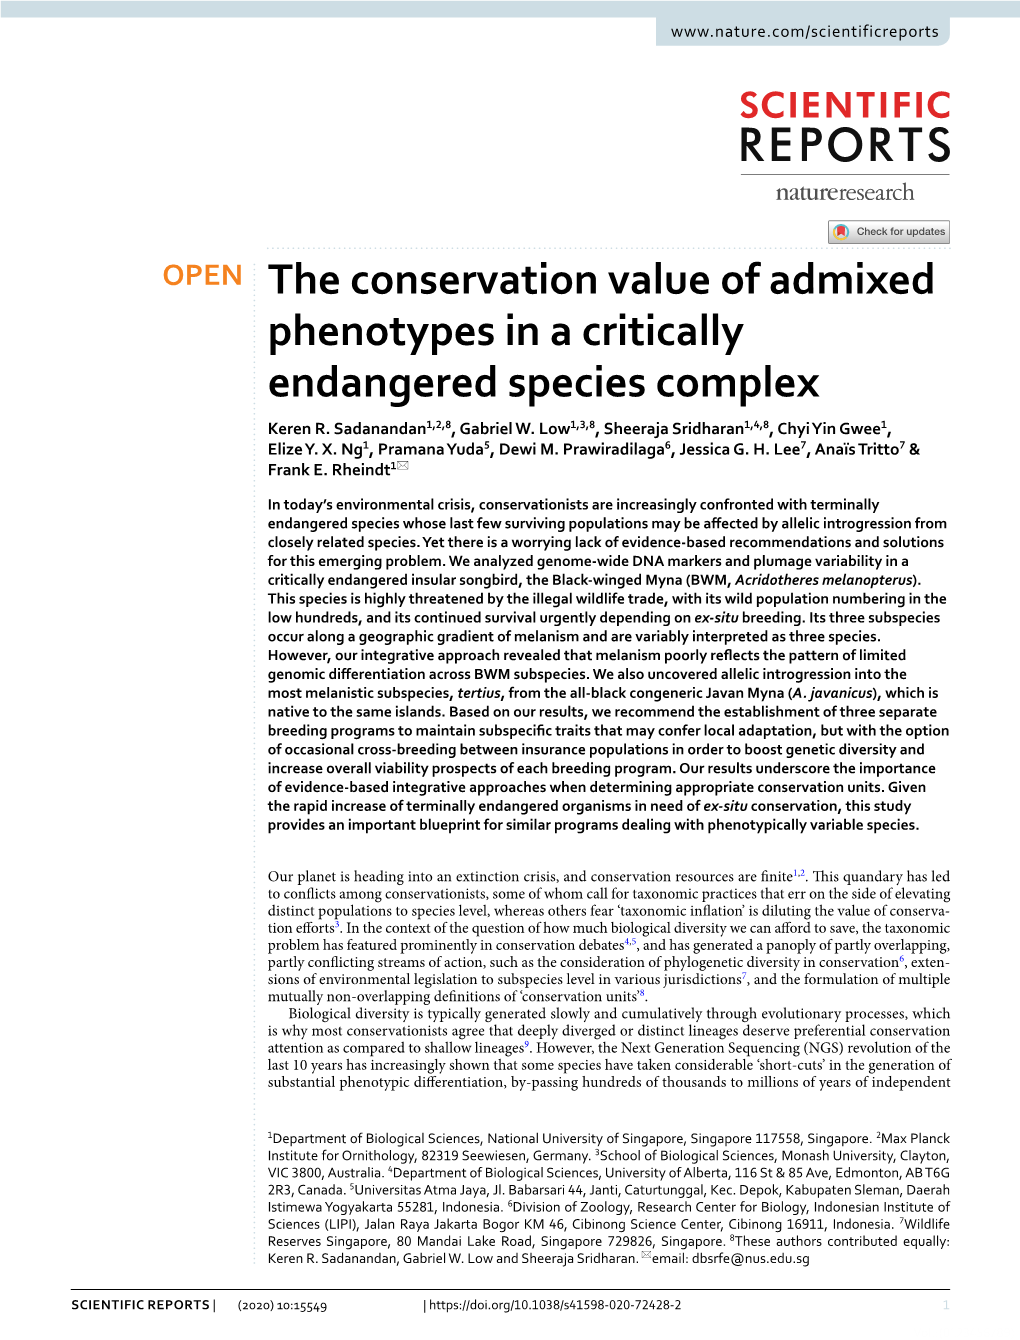 The Conservation Value of Admixed Phenotypes in a Critically Endangered Species Complex Keren R